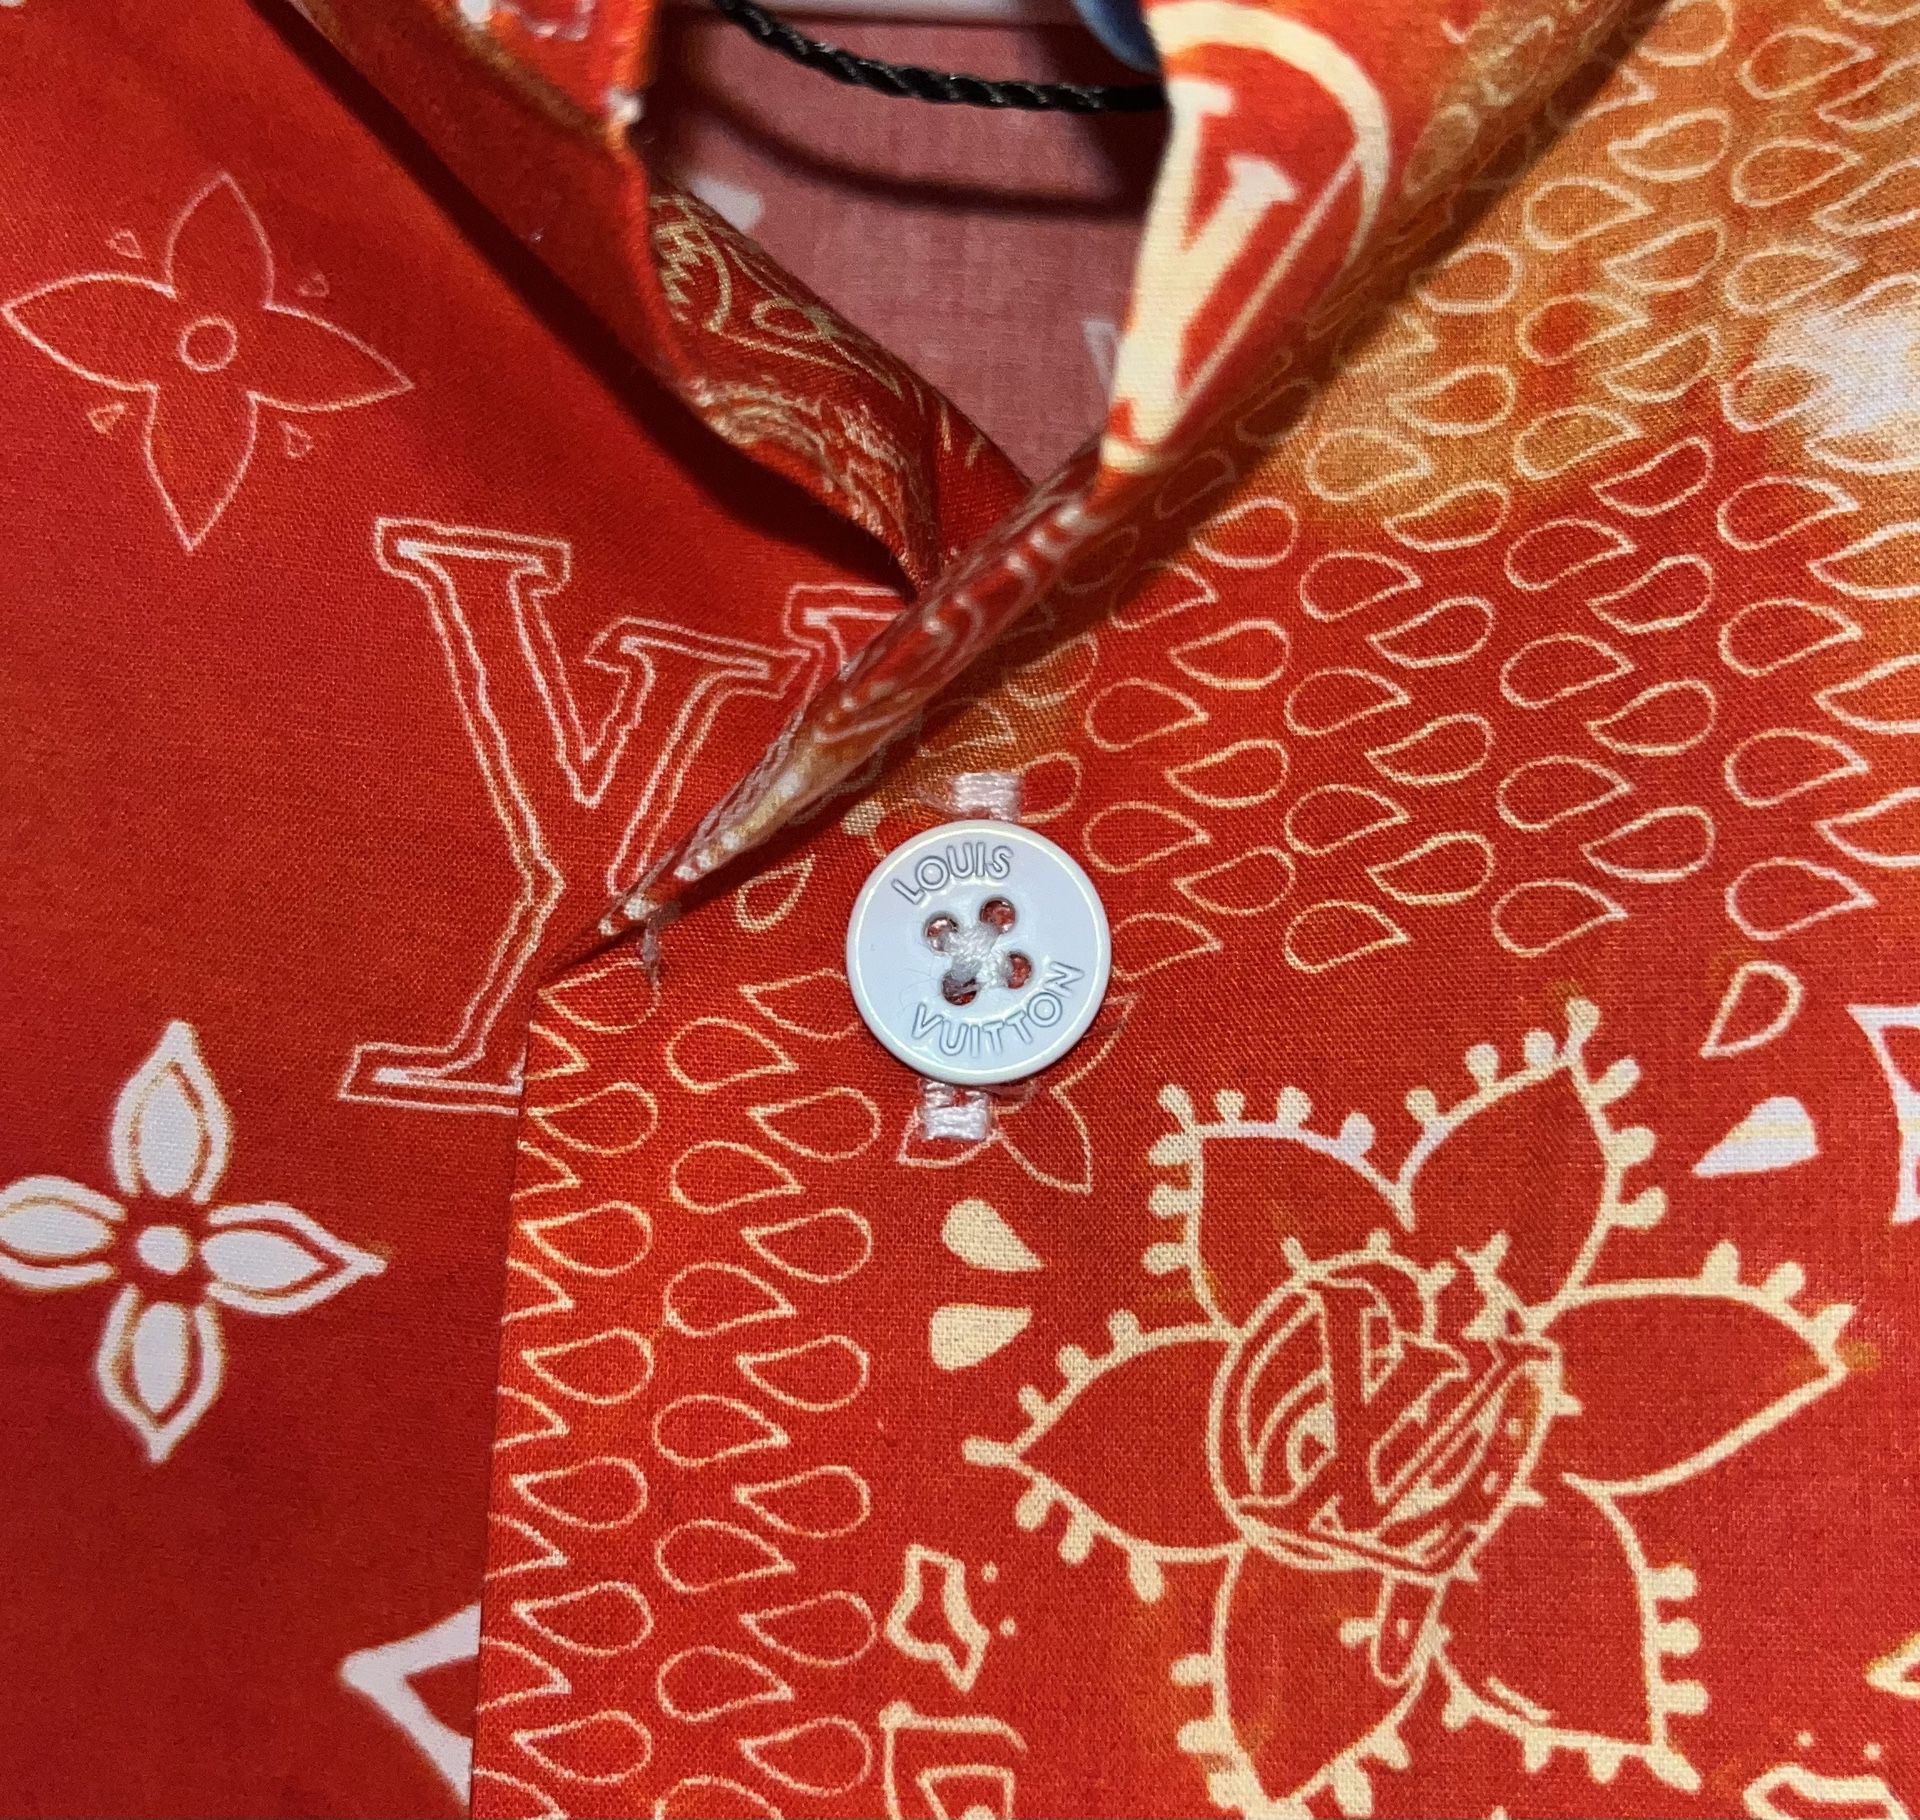 Brand New Louis Vuitton Monogram Bandana Short-Sleeved Shirt (Size: Medium)  for Sale in Valley Stream, NY - OfferUp